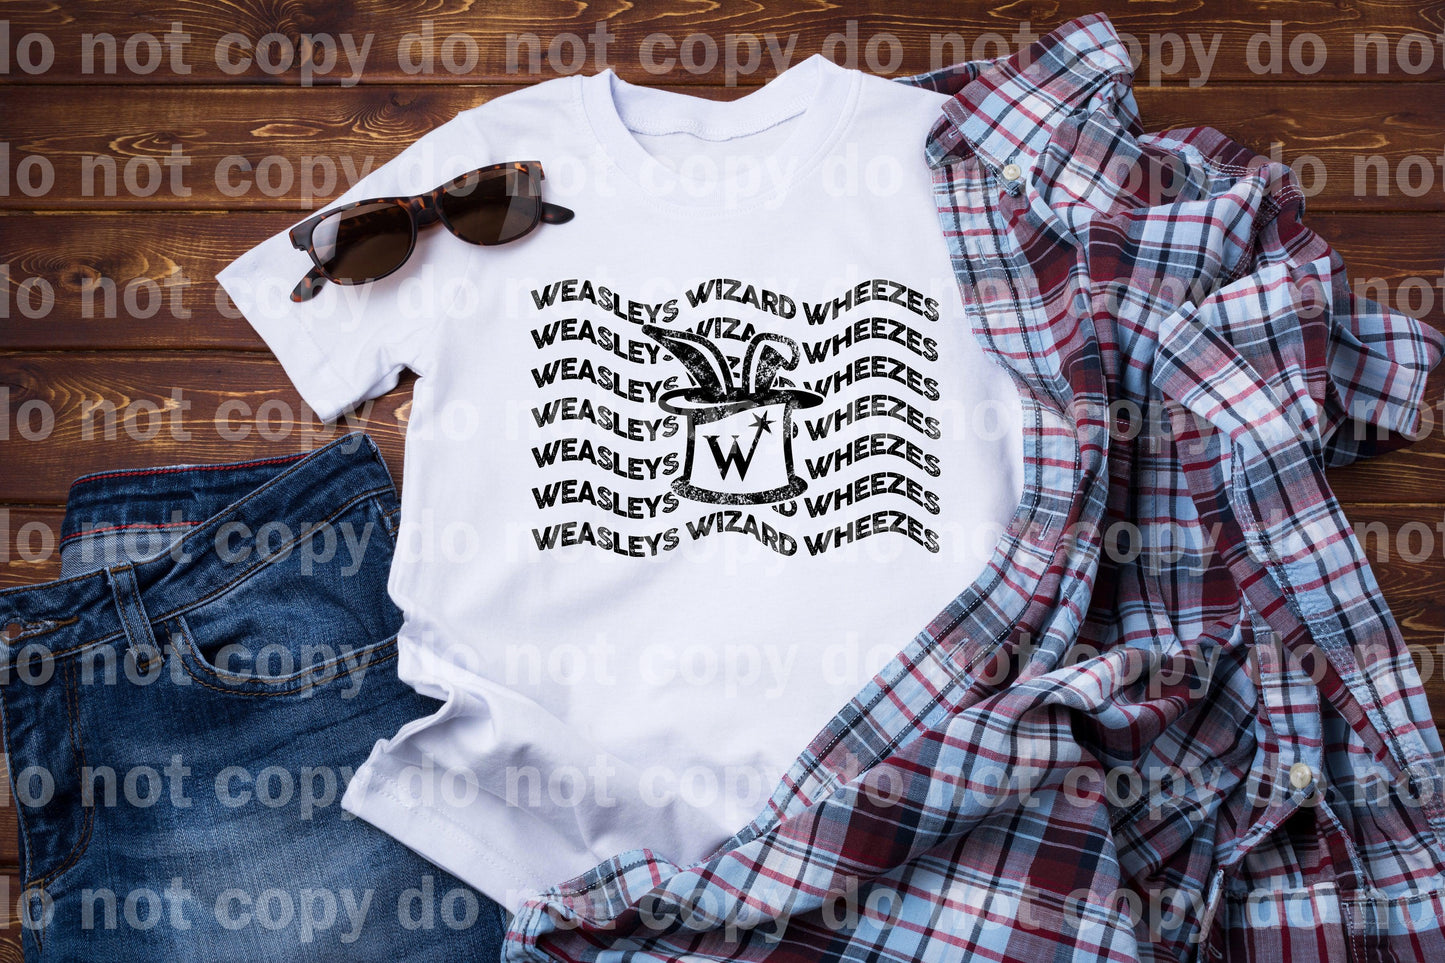 Weasley Wizard Wheezes Wavy Word Stack Black Dream Print or Sublimation Print